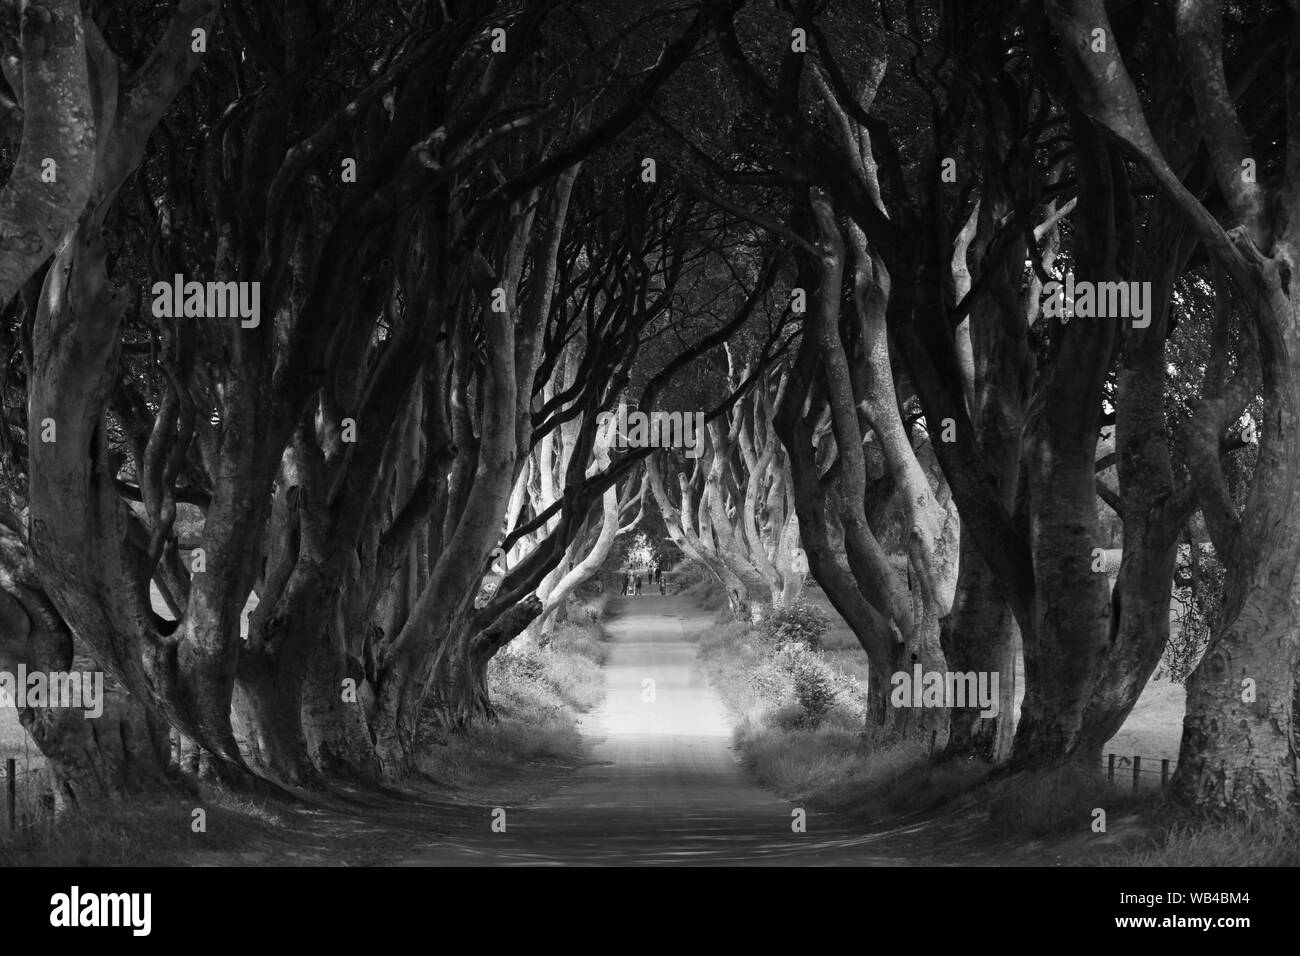 The Dark Hedges Road From The Game Of Thrones In Northern Ireland